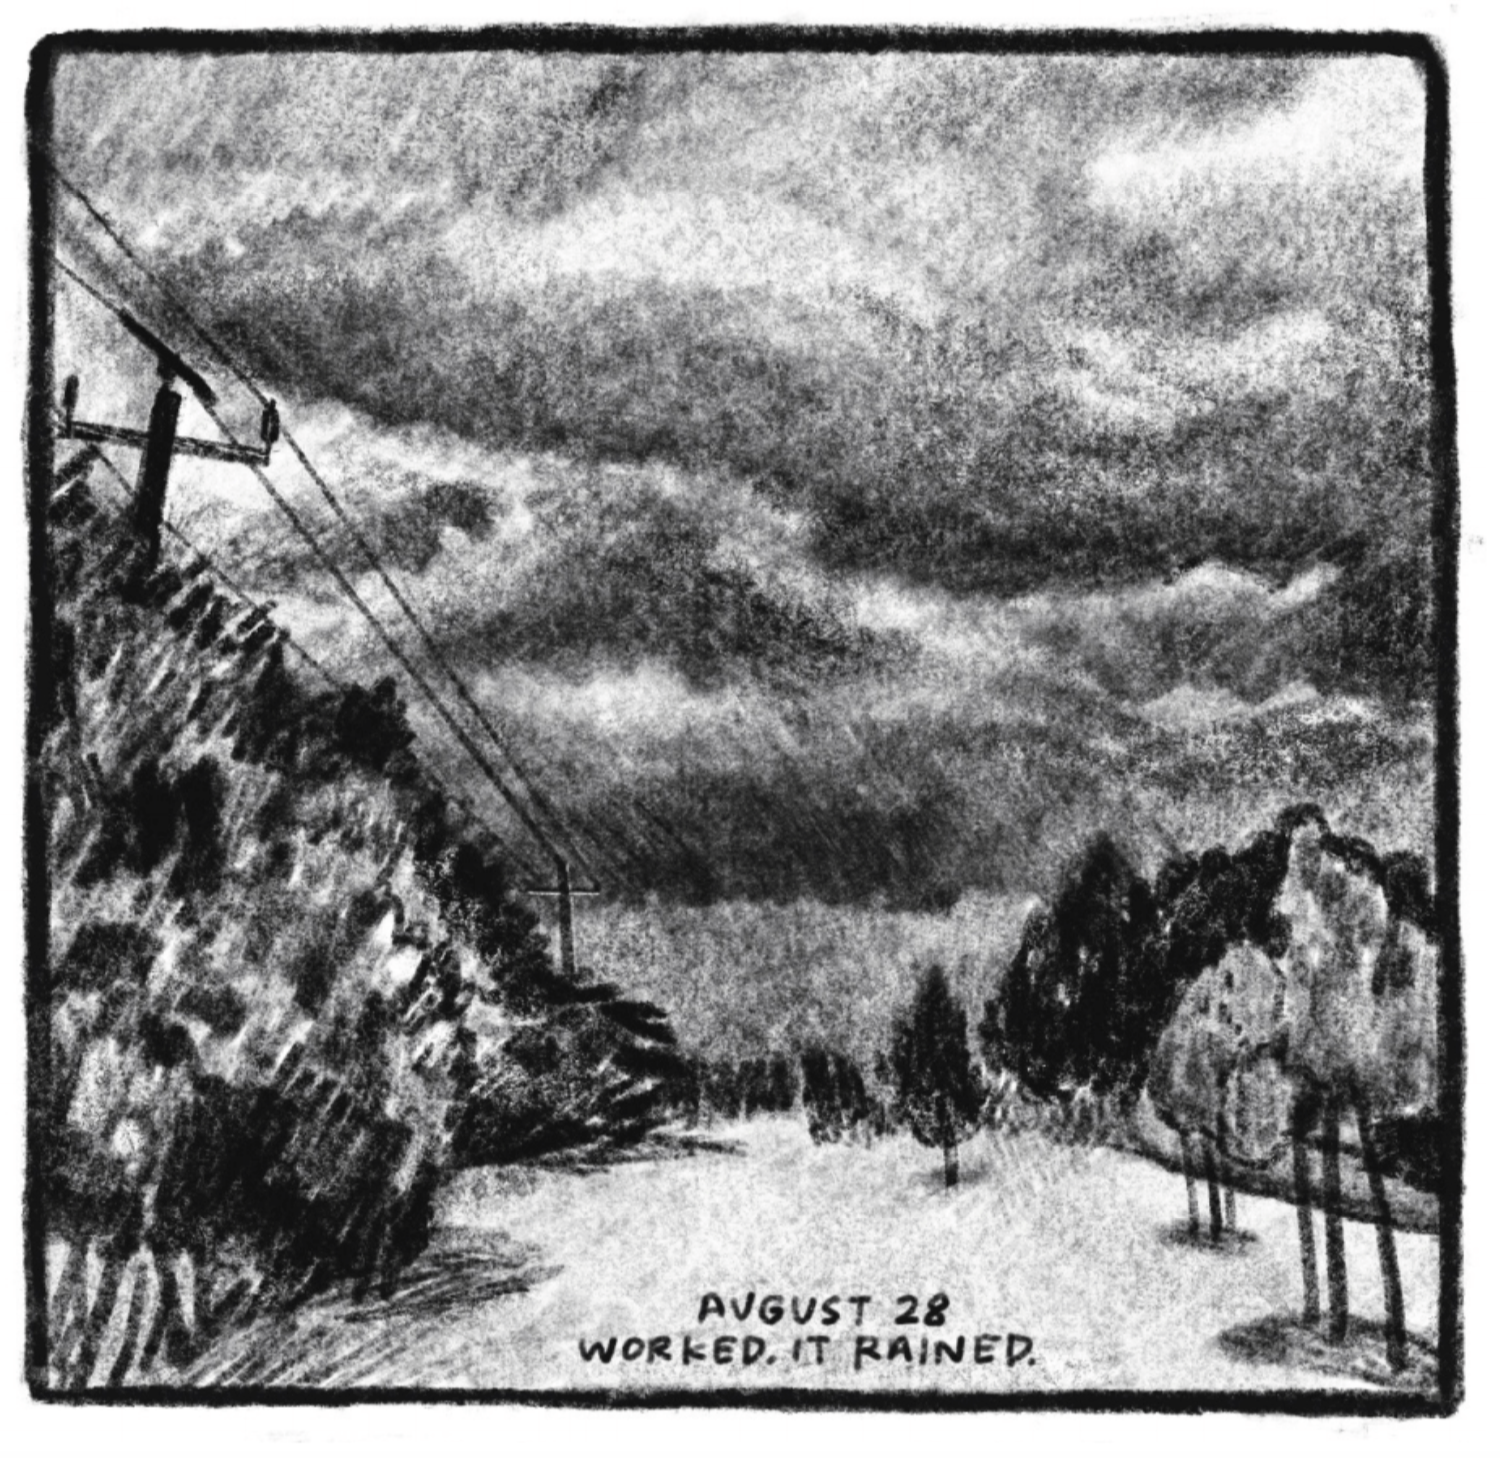 A landscape scene of a path dotted by trees on the right and fully lined by bushes, trees, and a power line on the left. The sky is completely filled with dark clouds. â€œAugust 28. Worked. It rained.â€